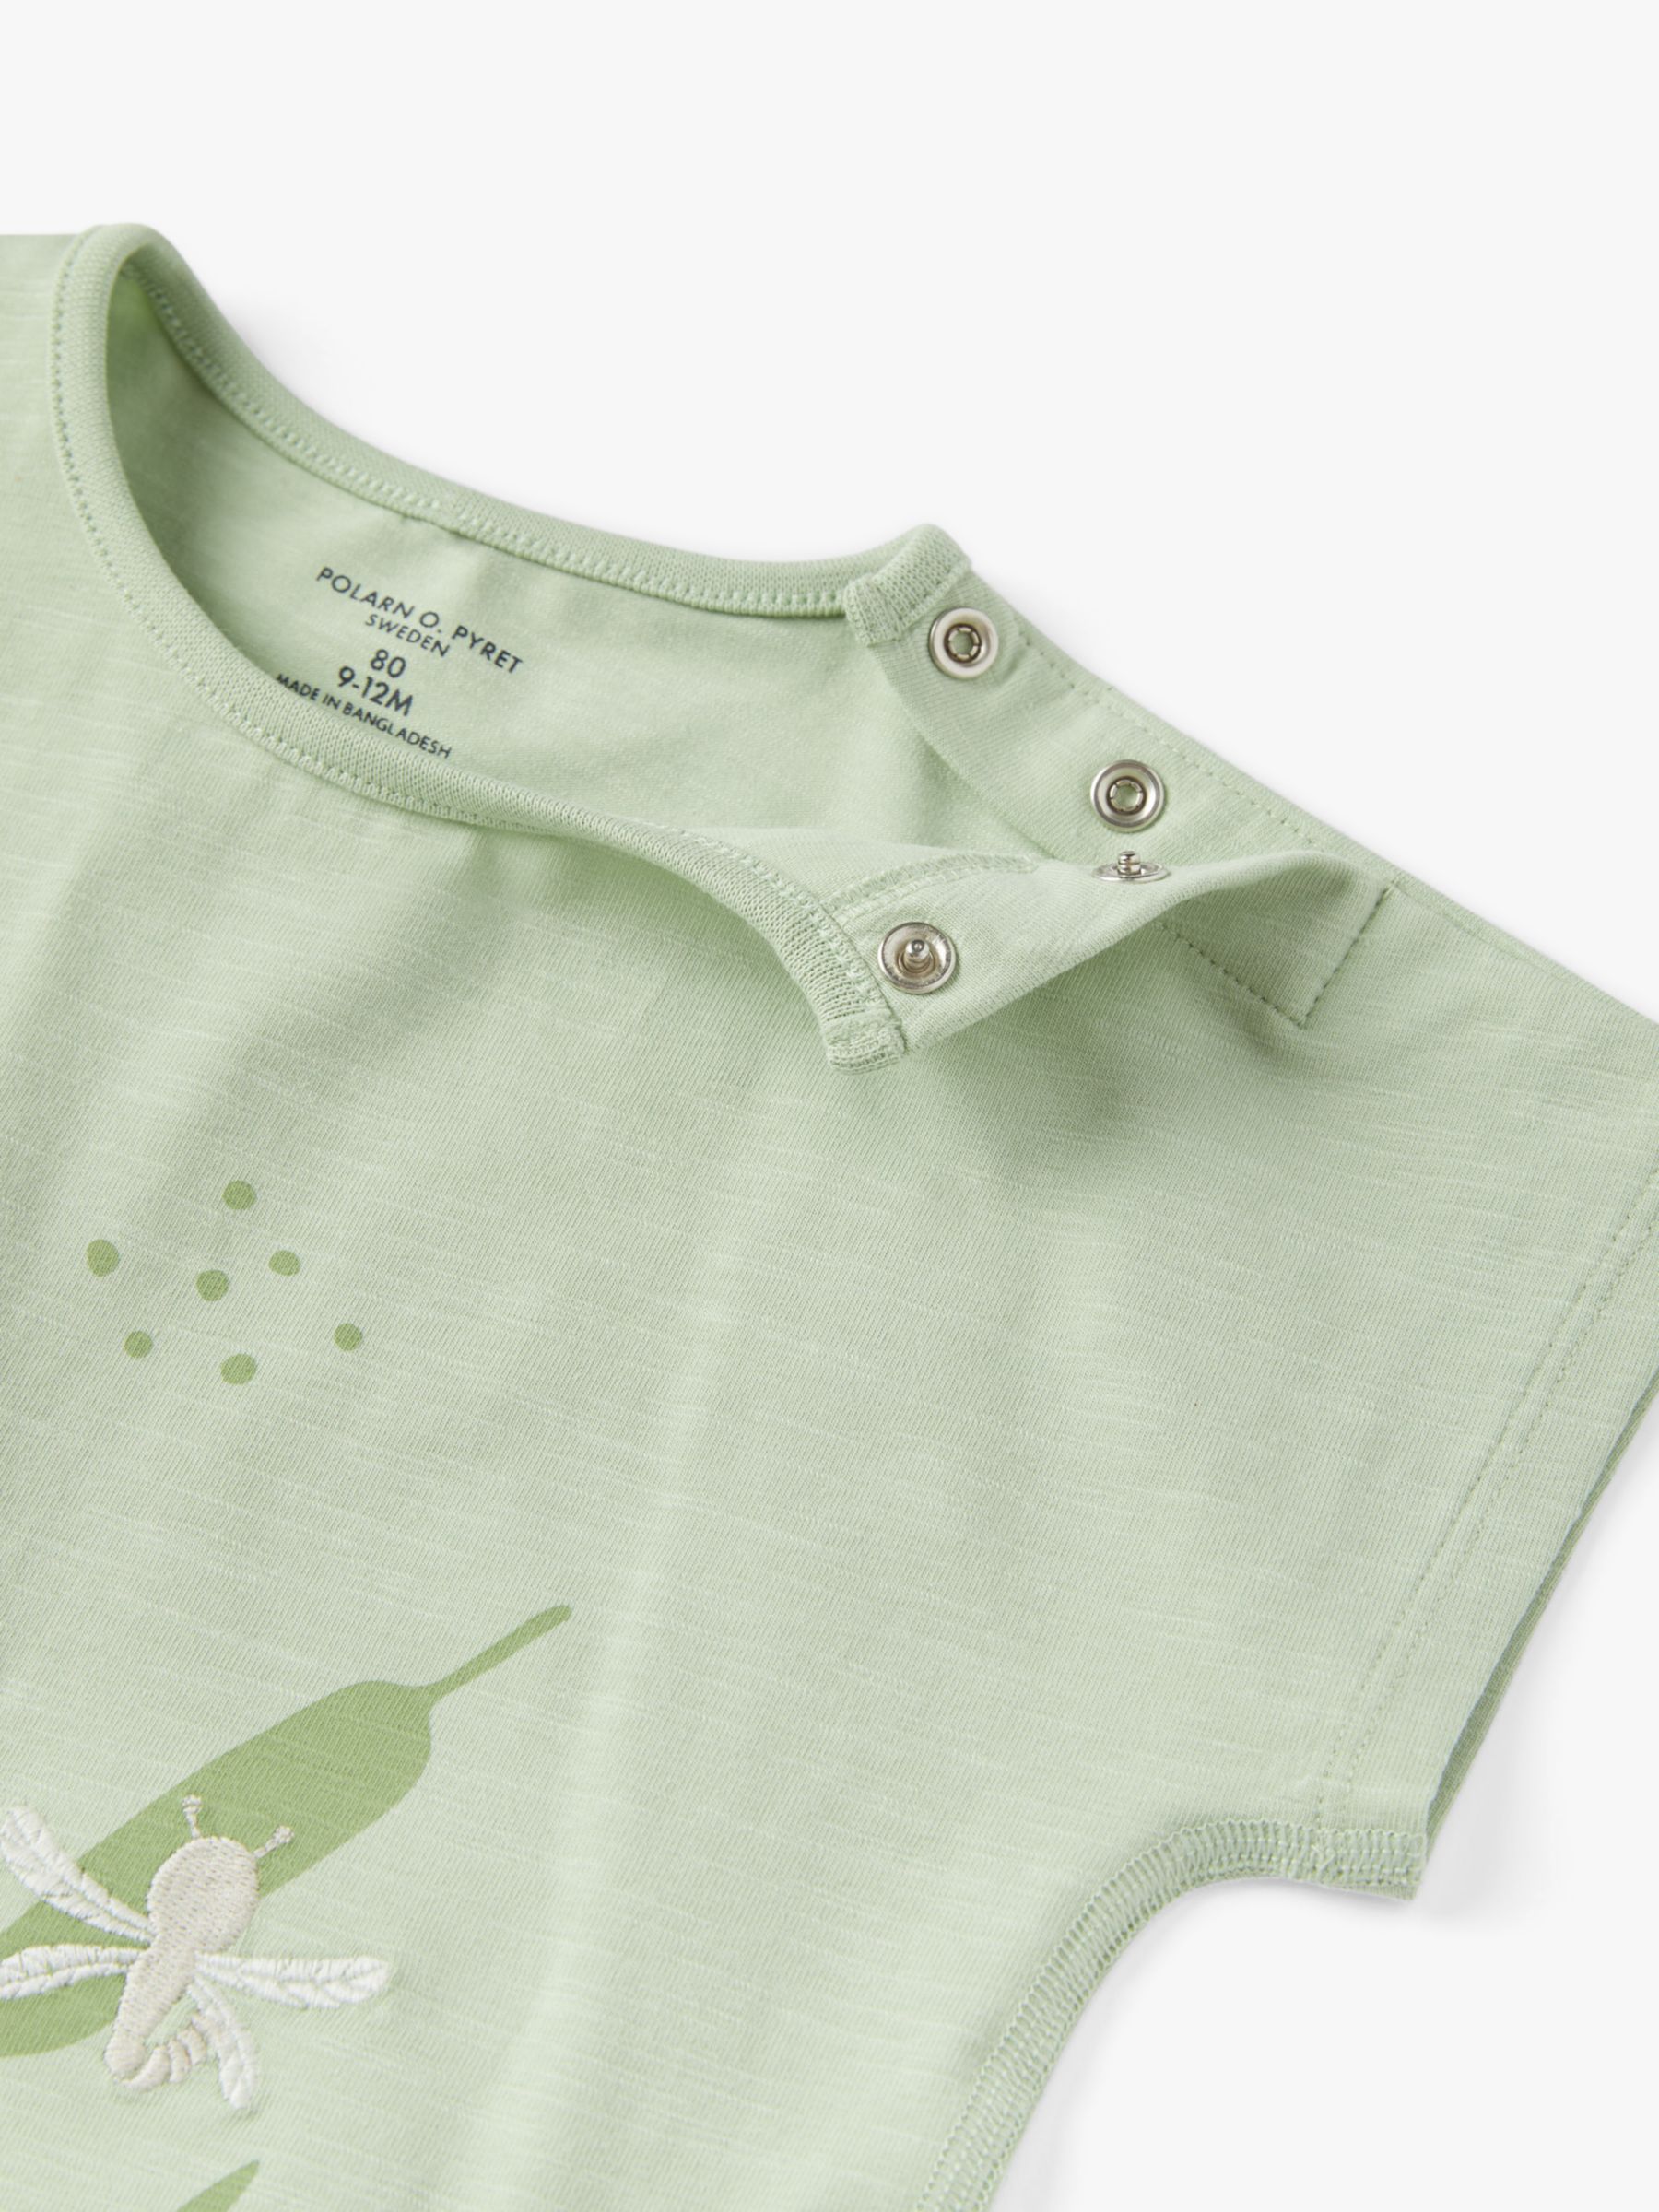 Polarn O. Pyret Baby Organic Cotton Blend Dragonfly Embroidered T-Shirt, Green, 2-4 months